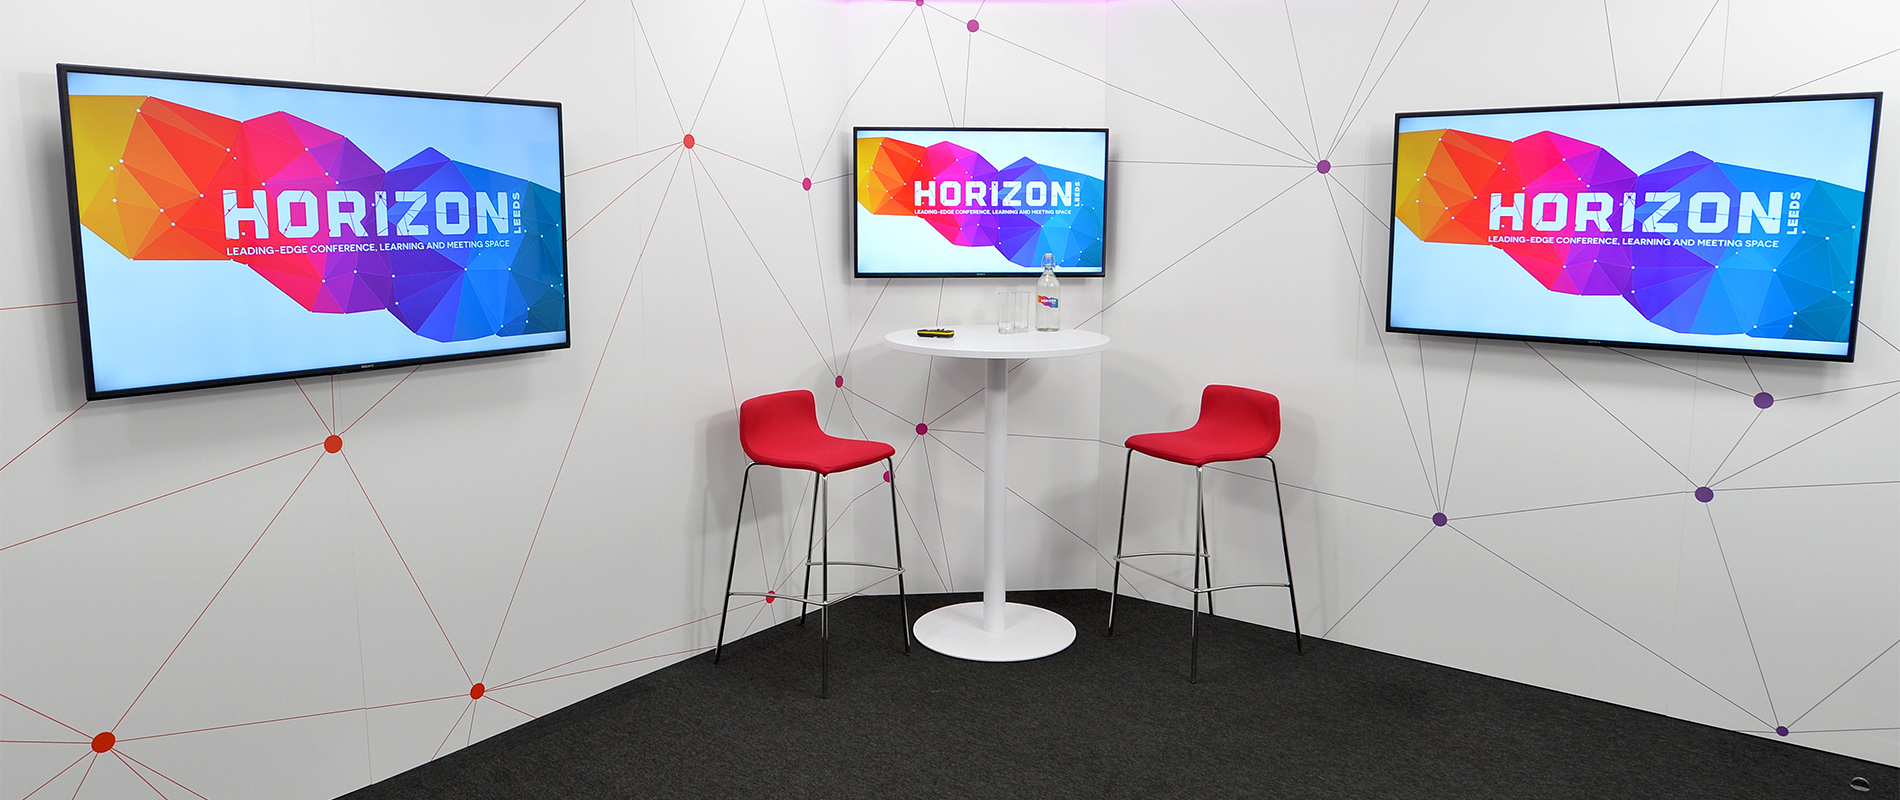 Broadcast Studio | Horizon Leeds | hybrid and streaming meetings and conferences | event venue